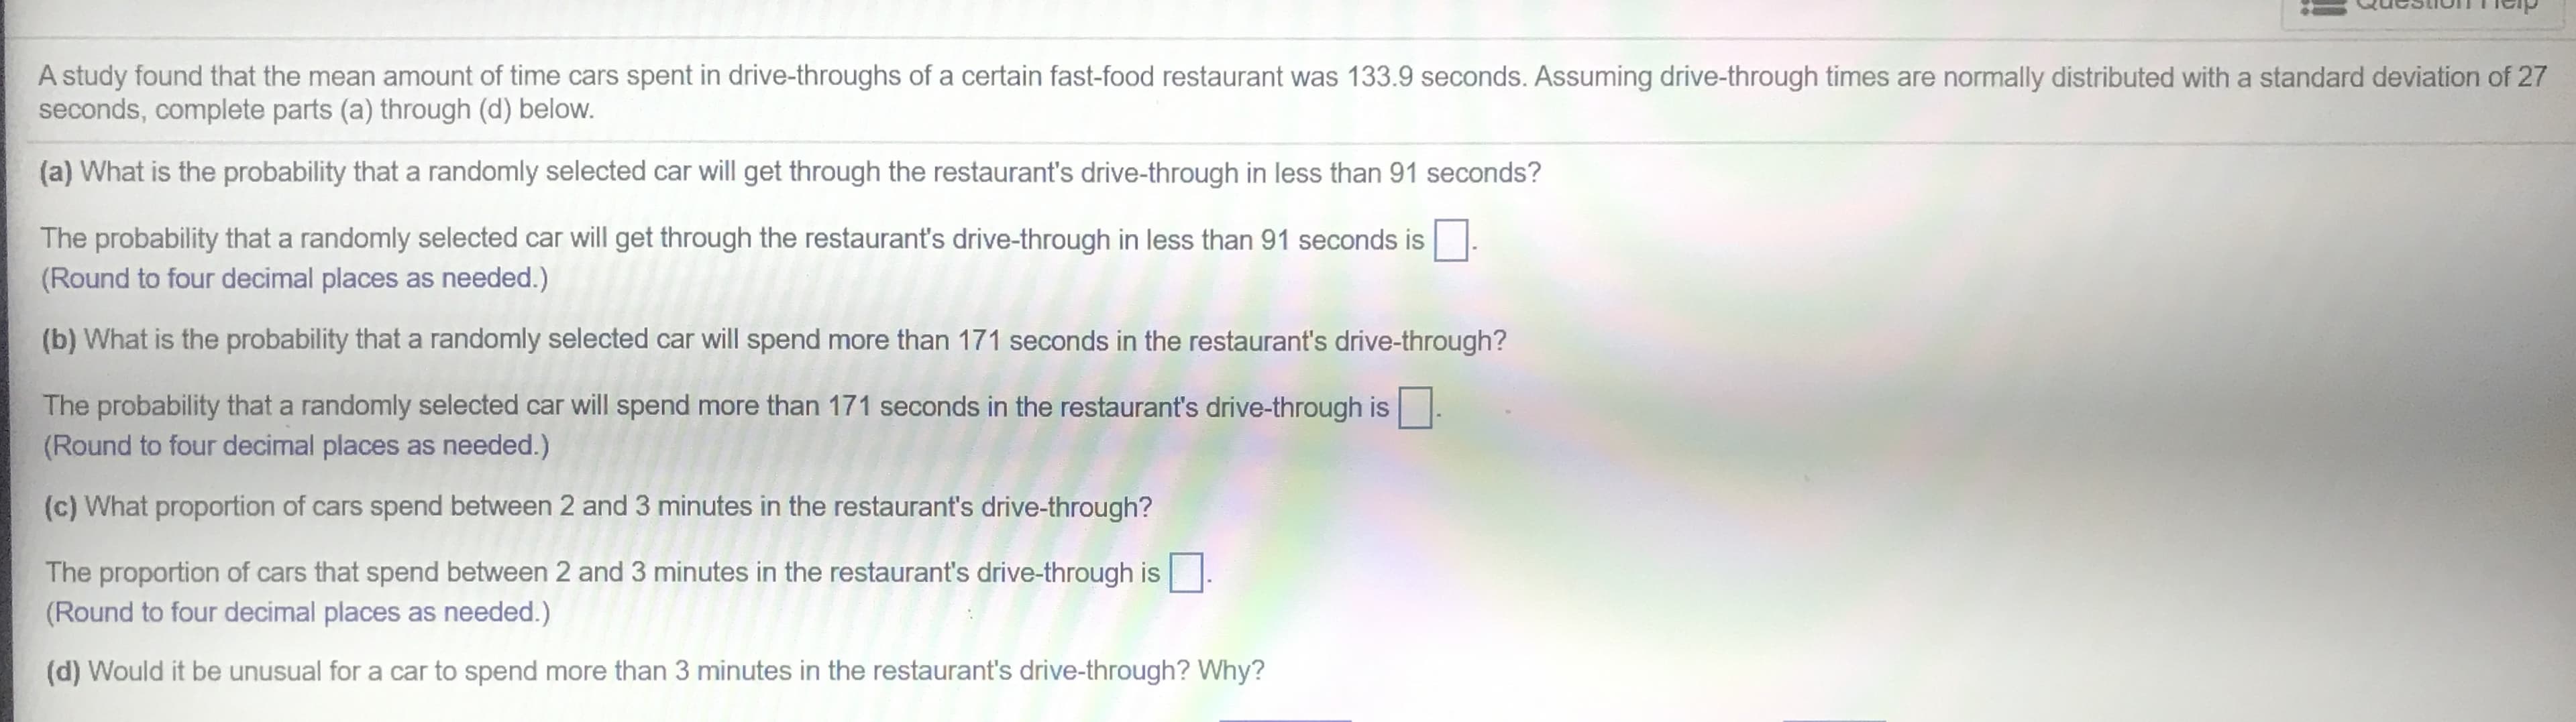 QucsthonTp
A study found that the mean amount of time cars spent in drive-throughs of a certain fast-food restaurant was 133.9 seconds. Assuming drive-through times are normally distributed with a standard deviation of 27
seconds, complete parts (a) through (d) below.
(a) What is the probability that a randomly selected car will get through the restaurant's drive-through in less than 91 seconds?
The probability that a randomly selected car will get through the restaurant's drive-through in less than 91 seconds is
(Round to four decimal places as needed.)
(b) What is the probability that a randomly selected car will spend more than 171 seconds in the restaurant's drive-through?
The probability that a randomly selected car will spend more than 171 seconds in the restaurant's drive-through is
(Round to four decimal places as needed.)
(c) What proportion of cars spend between 2 and 3 minutes in the restaurant's drive-through?
The proportion of cars that spend between 2 and 3 minutes in the restaurant's drive-through is
(Round to four decimal places as needed.)
(d) Would it be unusual for a car to spend more than 3 minutes in the restaurant's drive-through? Why?
